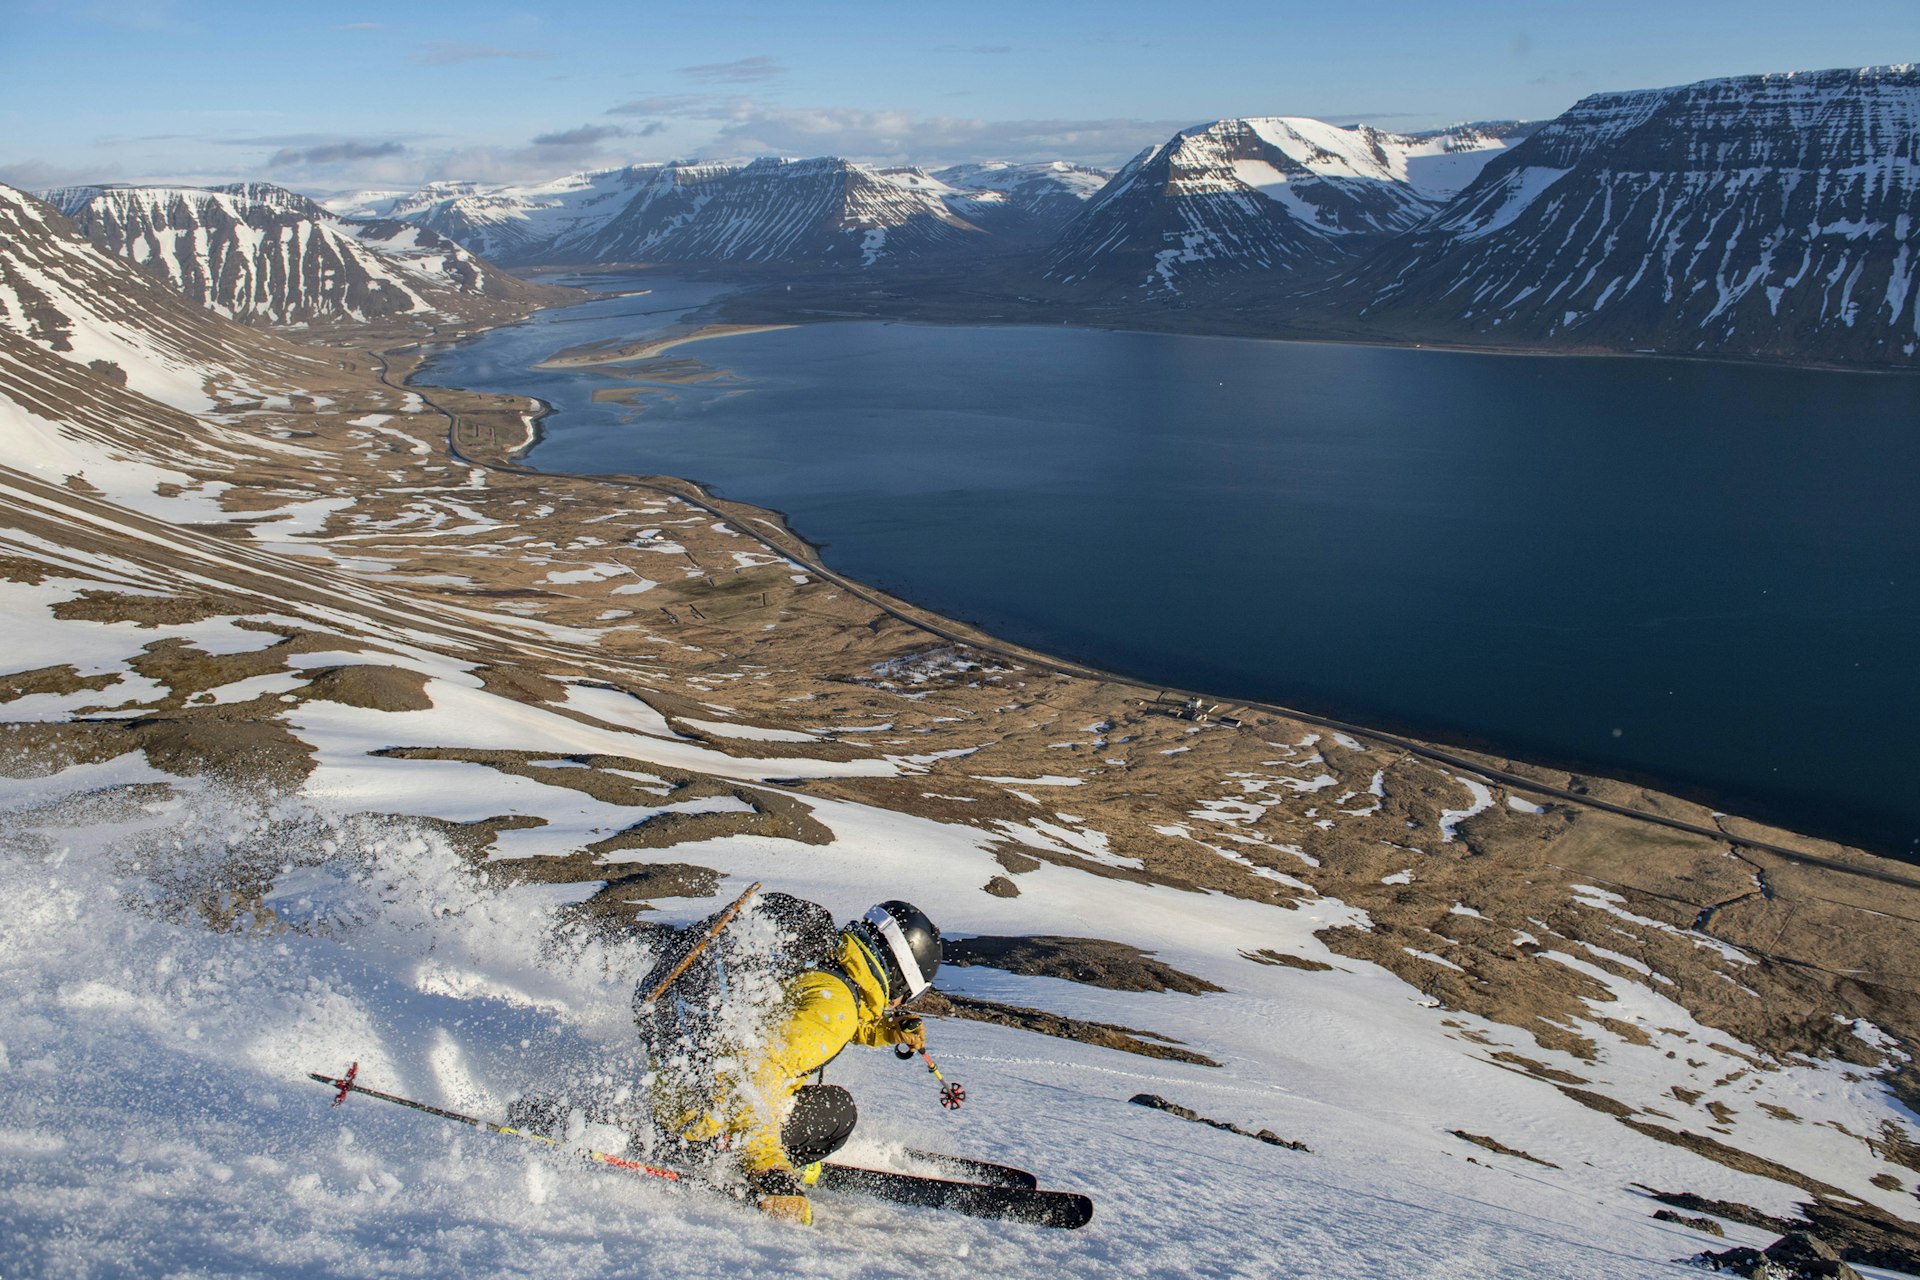 A skier glides along a snow-covered mountainous landscape just above a lake